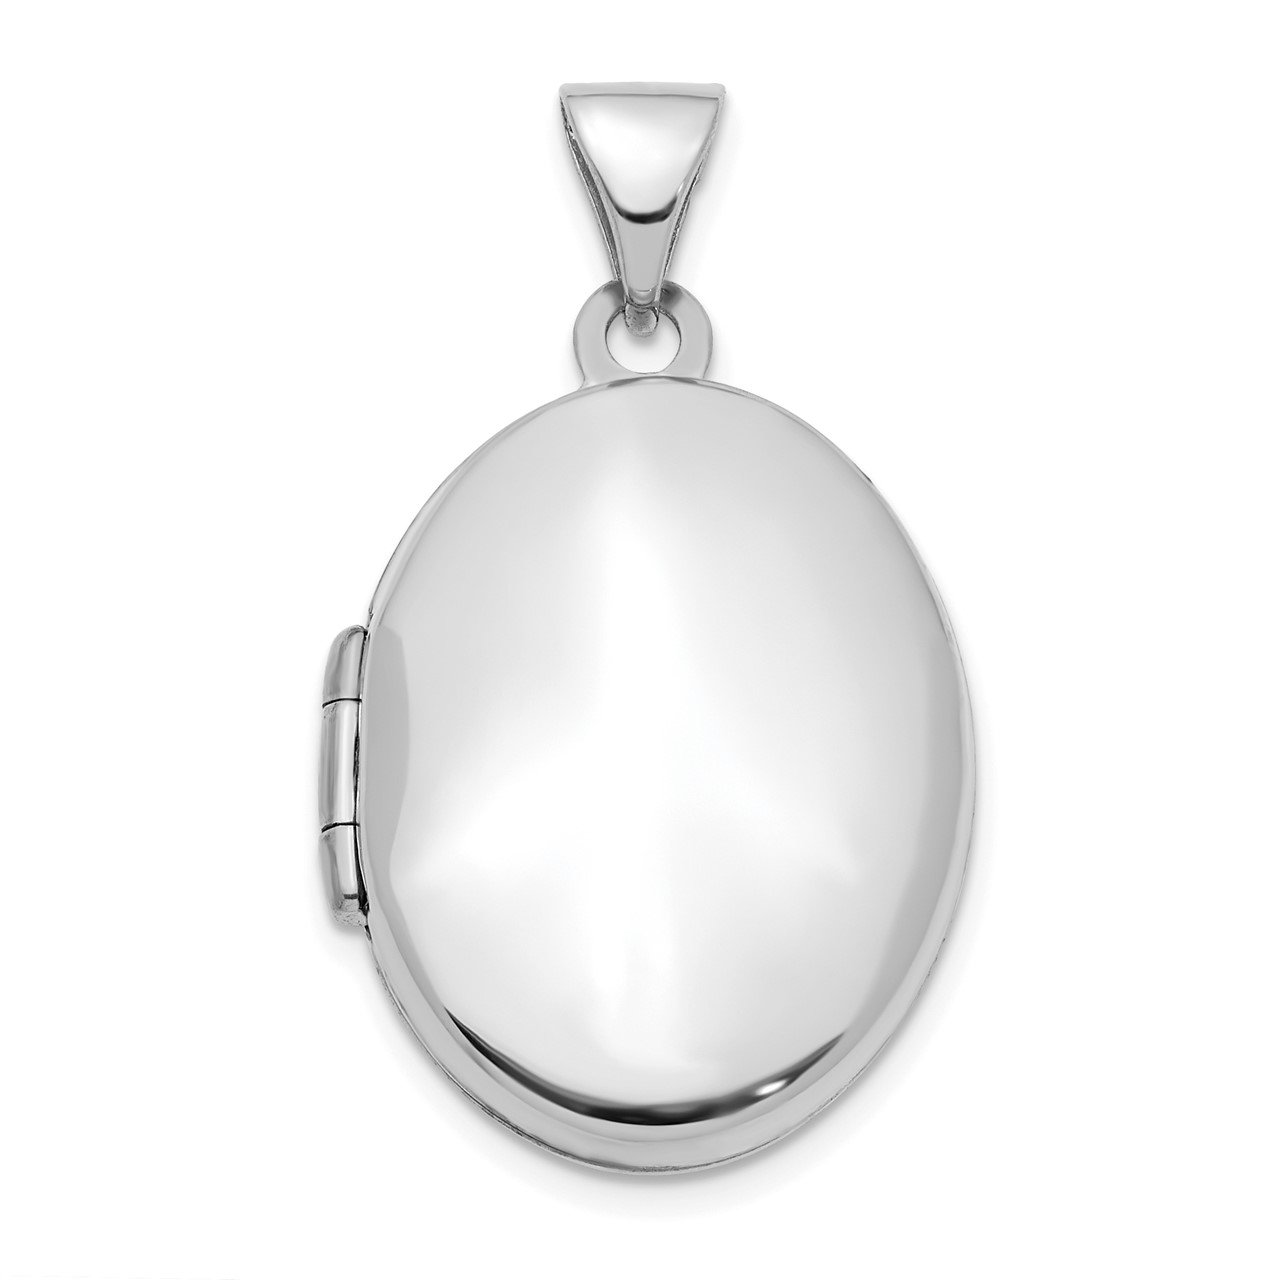 14K White Gold 21mm Oval Locket Pendant | The Gold Store